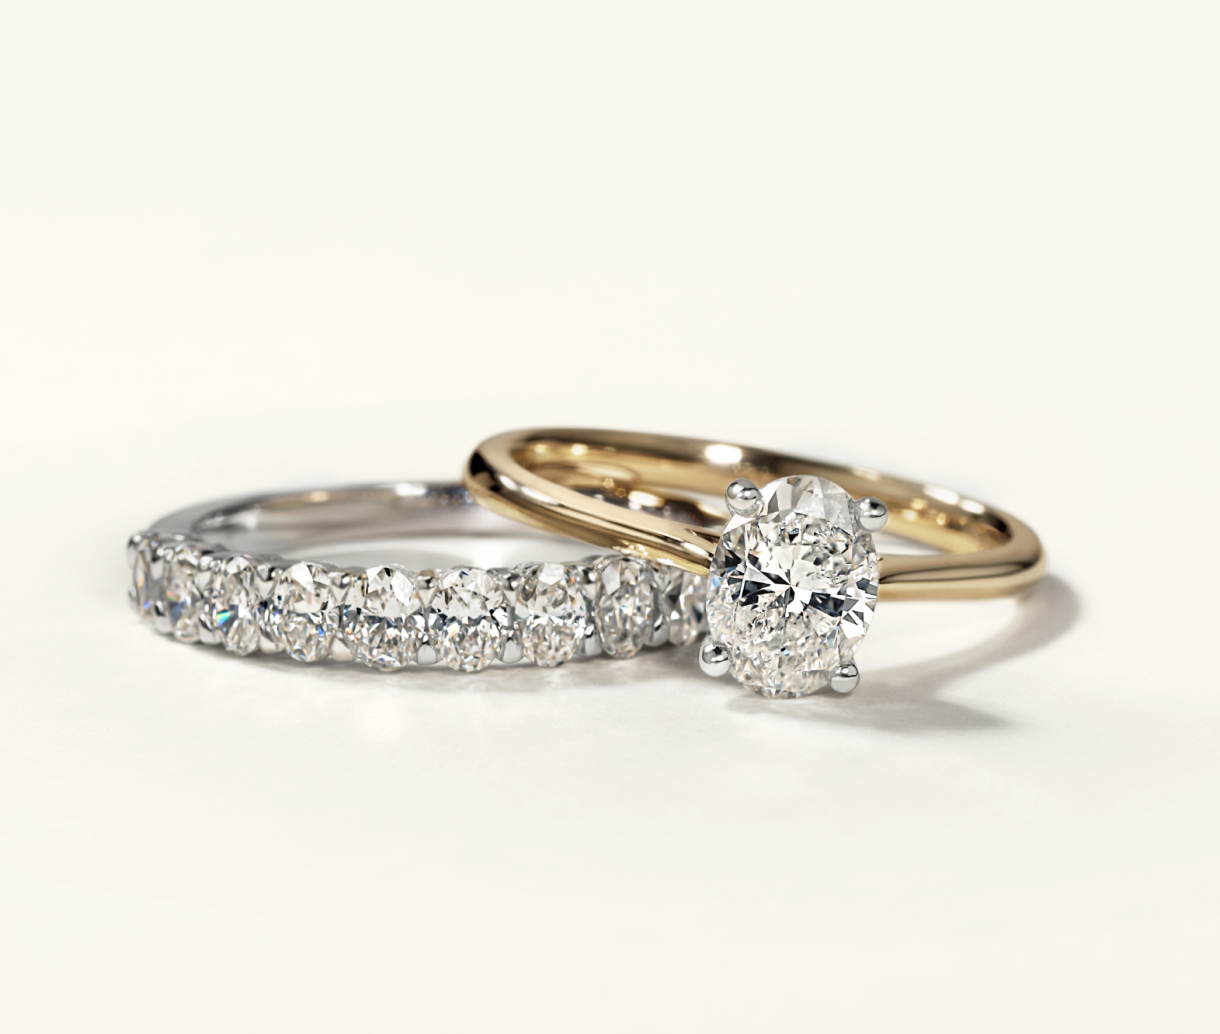 Image - WEDDING LP - The Journal - The Top Trends in Wedding Rings